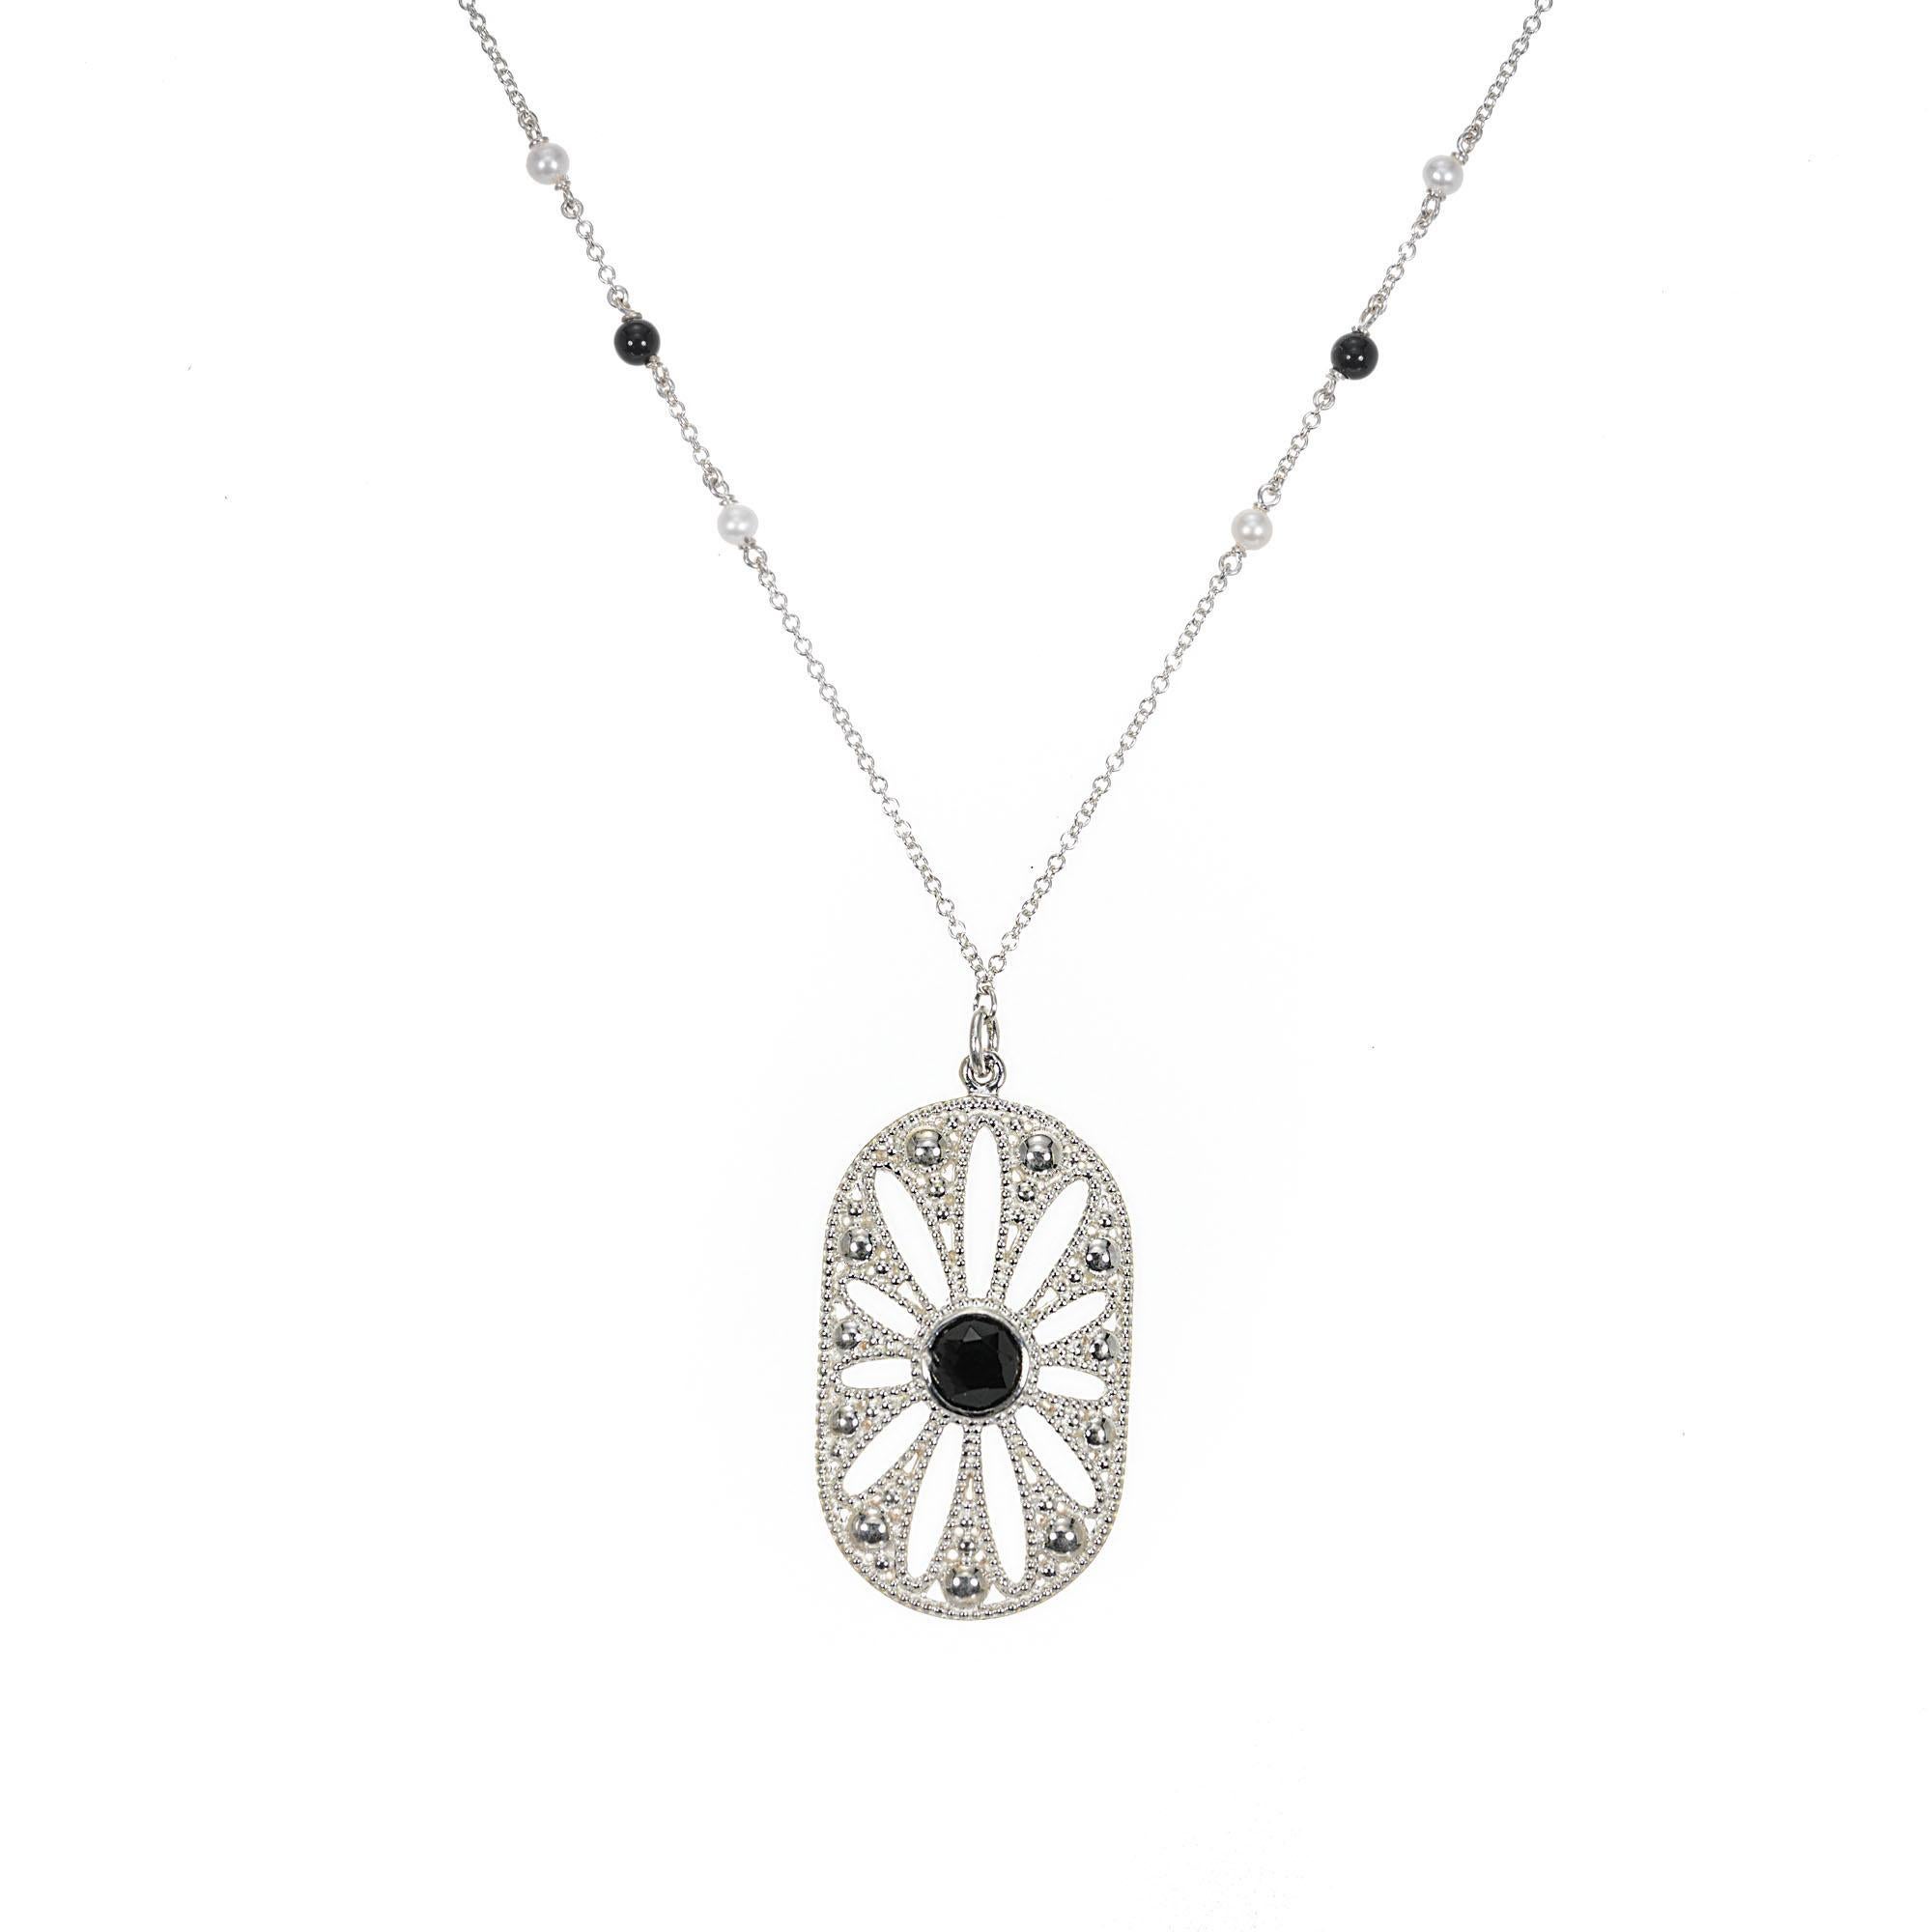 Ziegfeld collection Tiffany & Co sterling silver onyx and pearl pendant necklace. 24 inches and length. 

1 round cabochon onyx
6 round onyx
12 round pearls
Sterling Silver
Stamped: 925
Hallmark: Tiffany & Co
9.1 grams
Chain: 24 Inches
